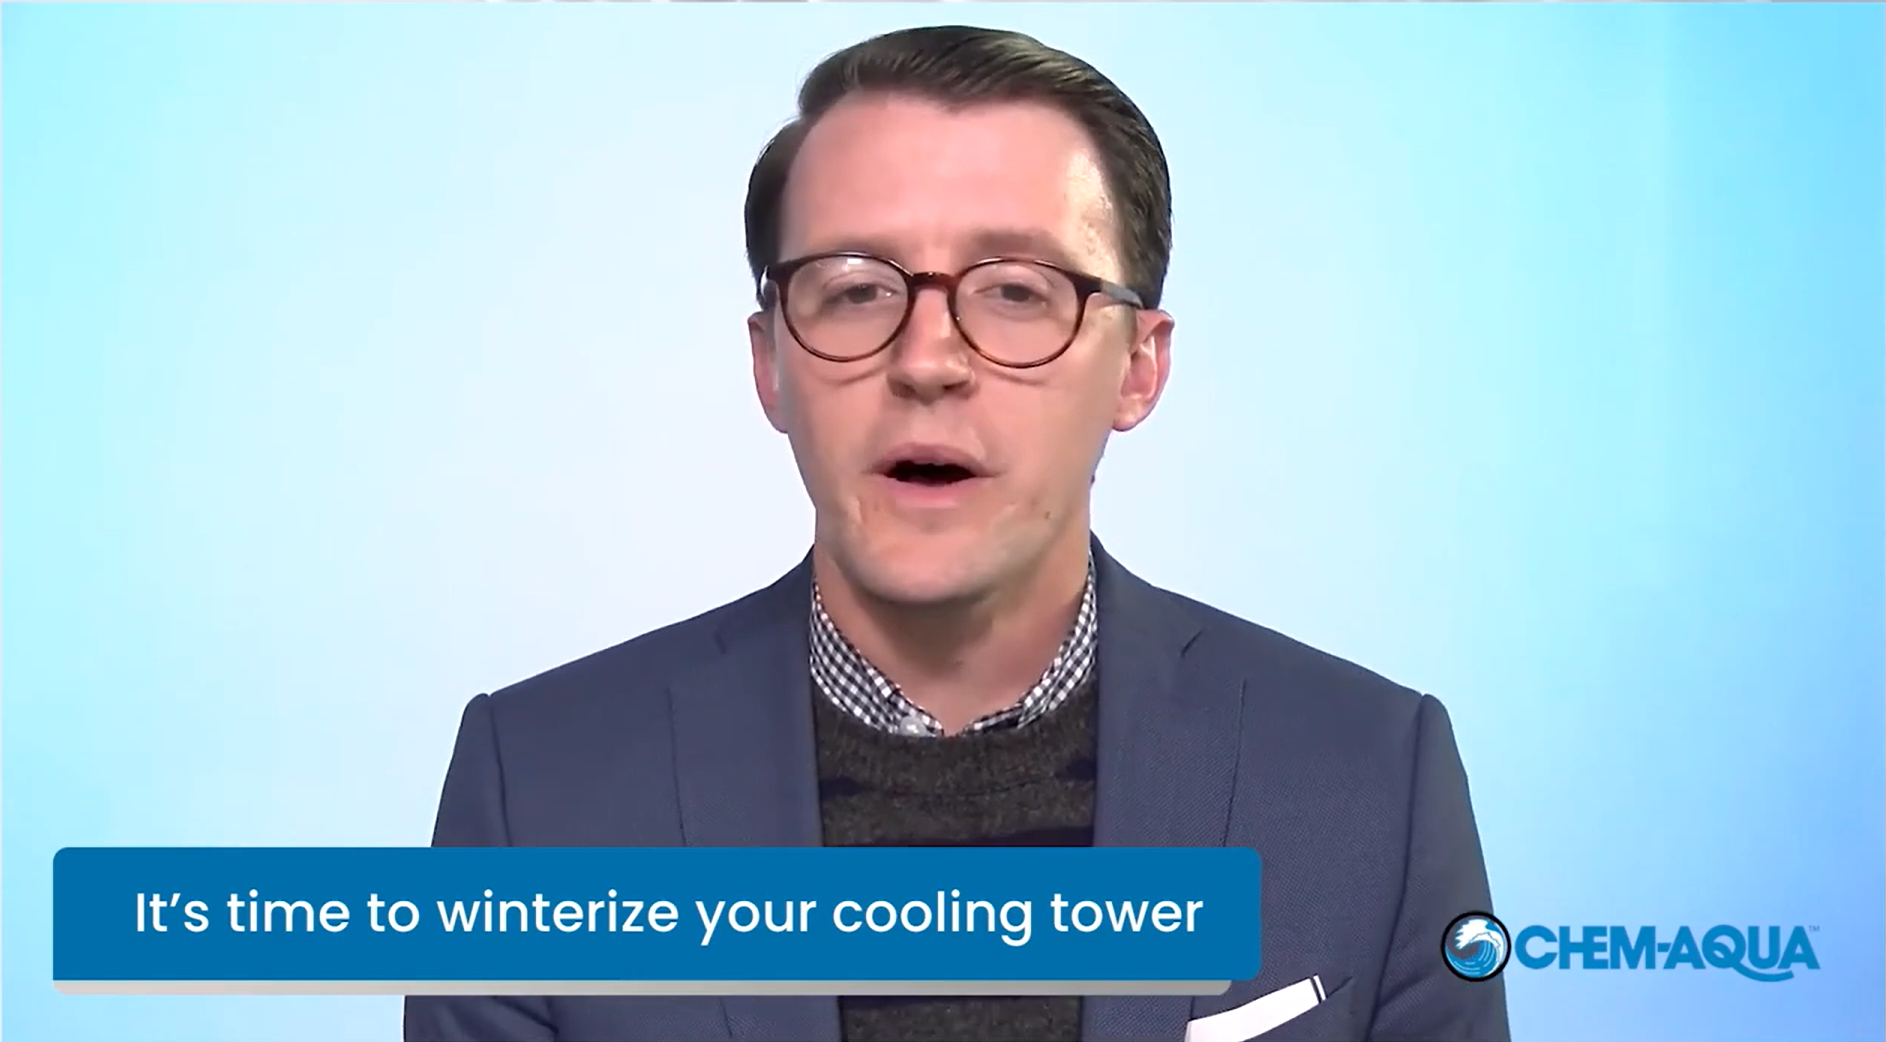 Podcast: It's Time to Winterize Your Cooling Tower